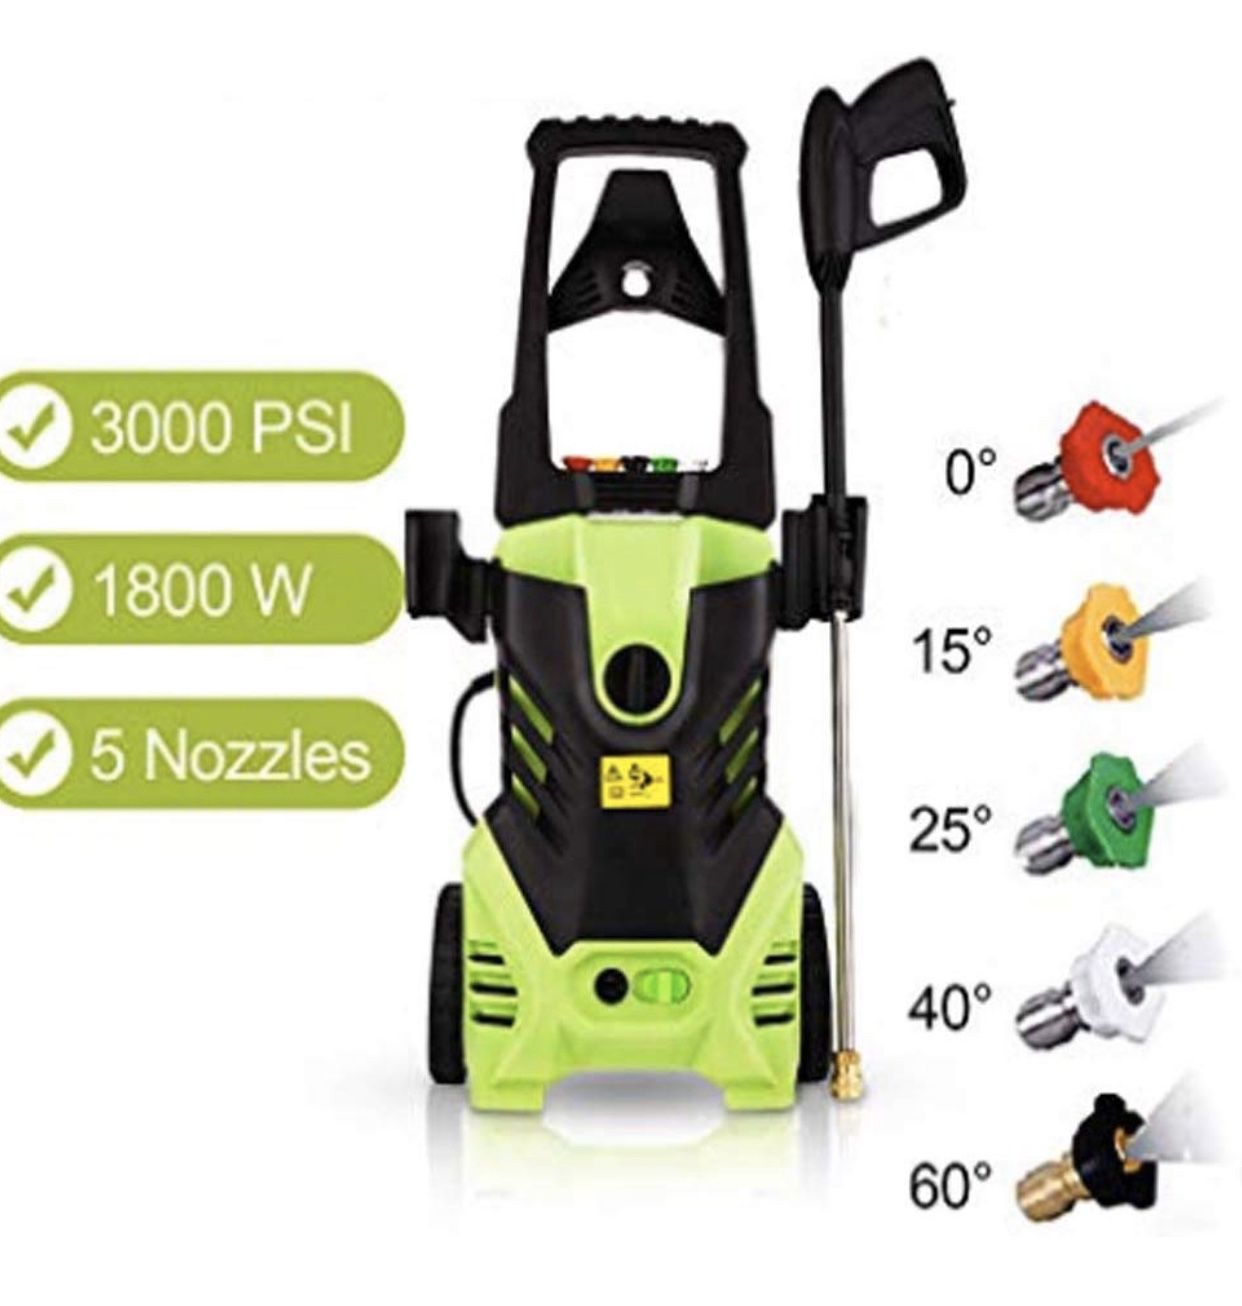 quede Pressure Washer, Electric Power Washer, Pressure Cleaner Machine, Car Washer, 1800W 3000 PSI 1.7 GPM Electric Power Washer with Spray Gun